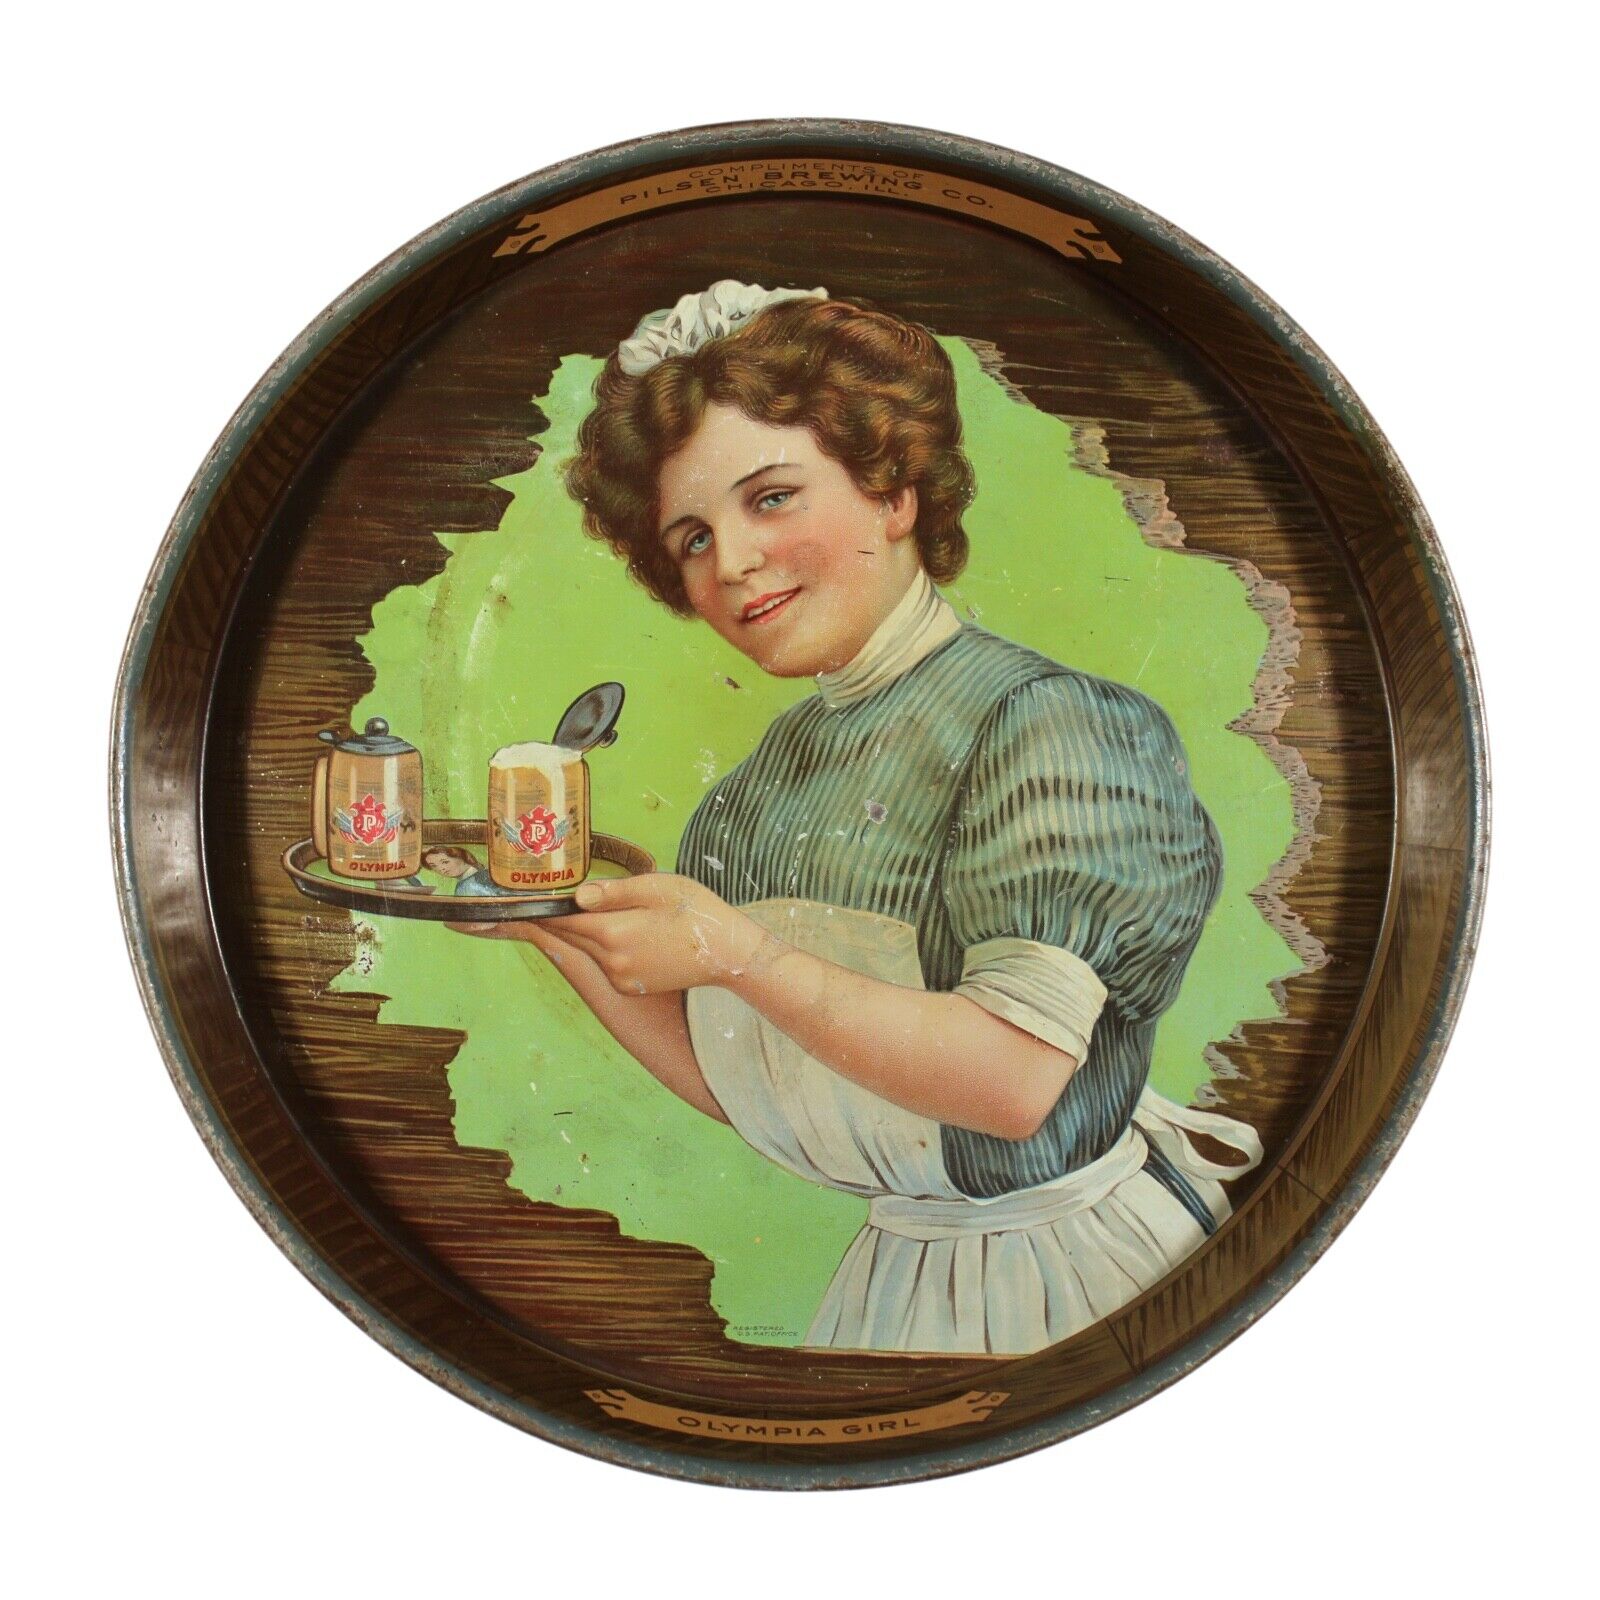 OLYMPIA GIRL BEER ADVERTISING TRAY PILSEN BREWING ANTIQUE KAUFMANN STRAUSS CO NY